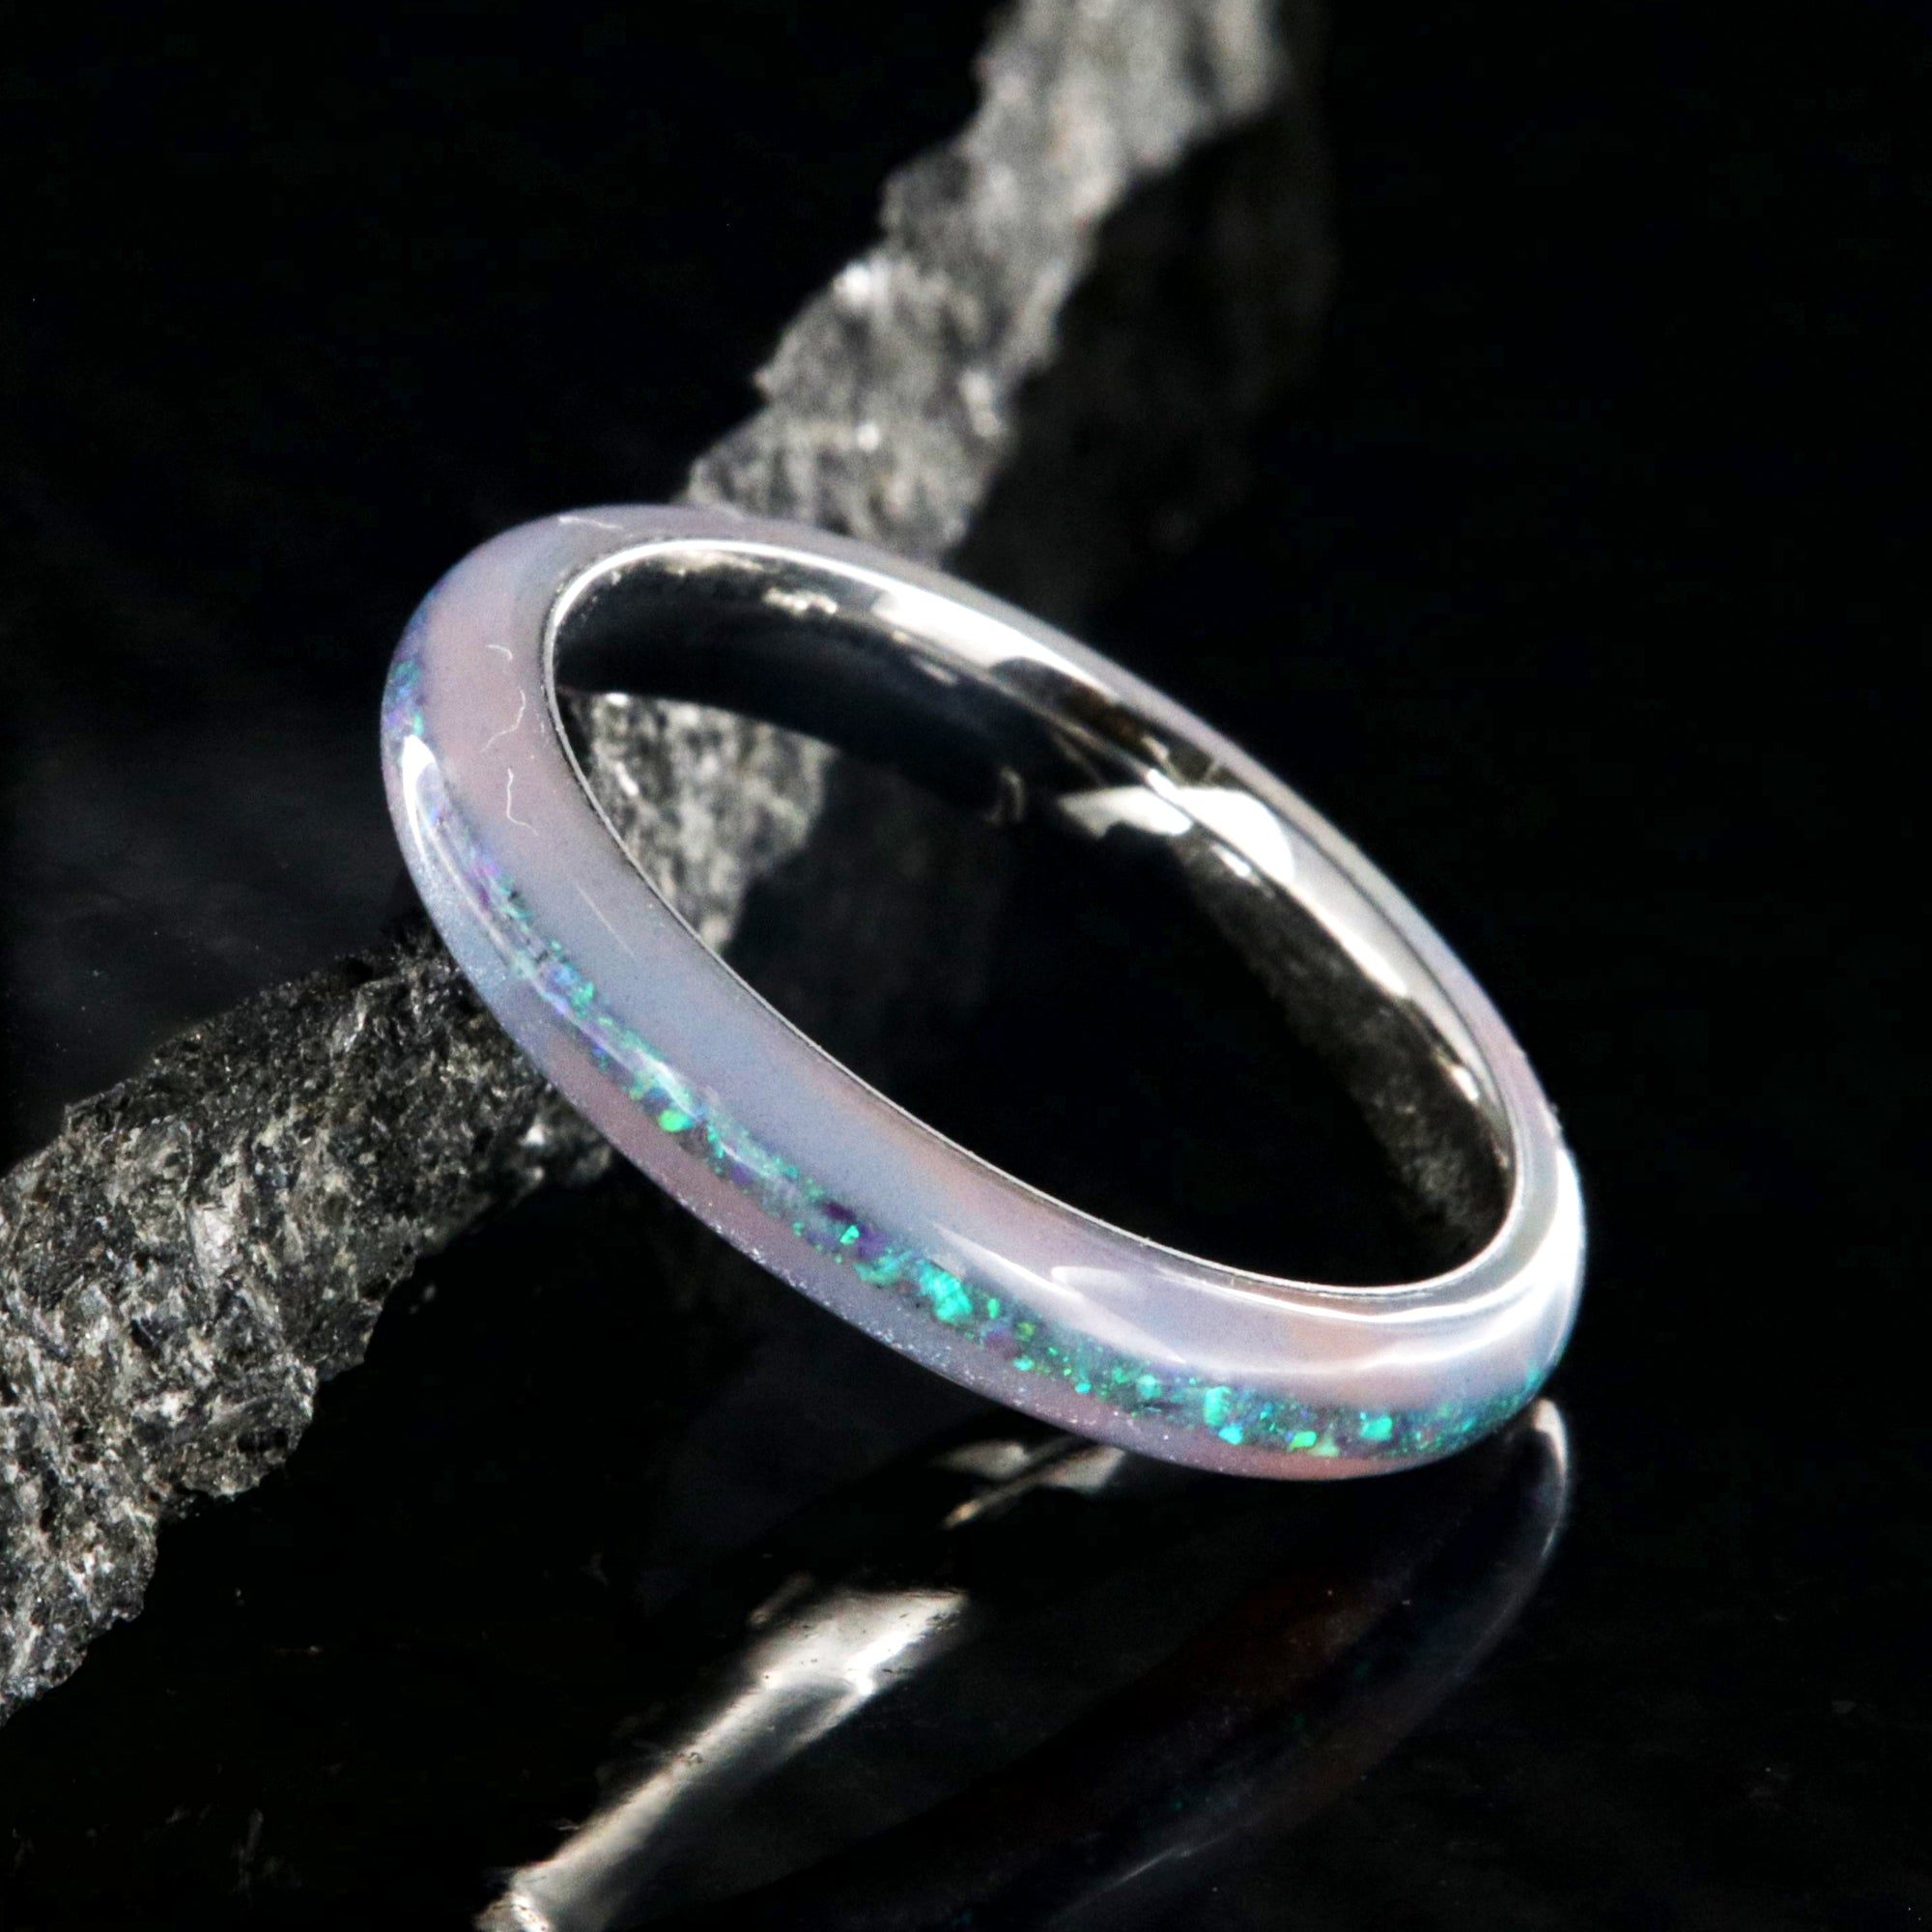 4mm wide promise ring with glittering rainbow edges and a crushed opal inlay